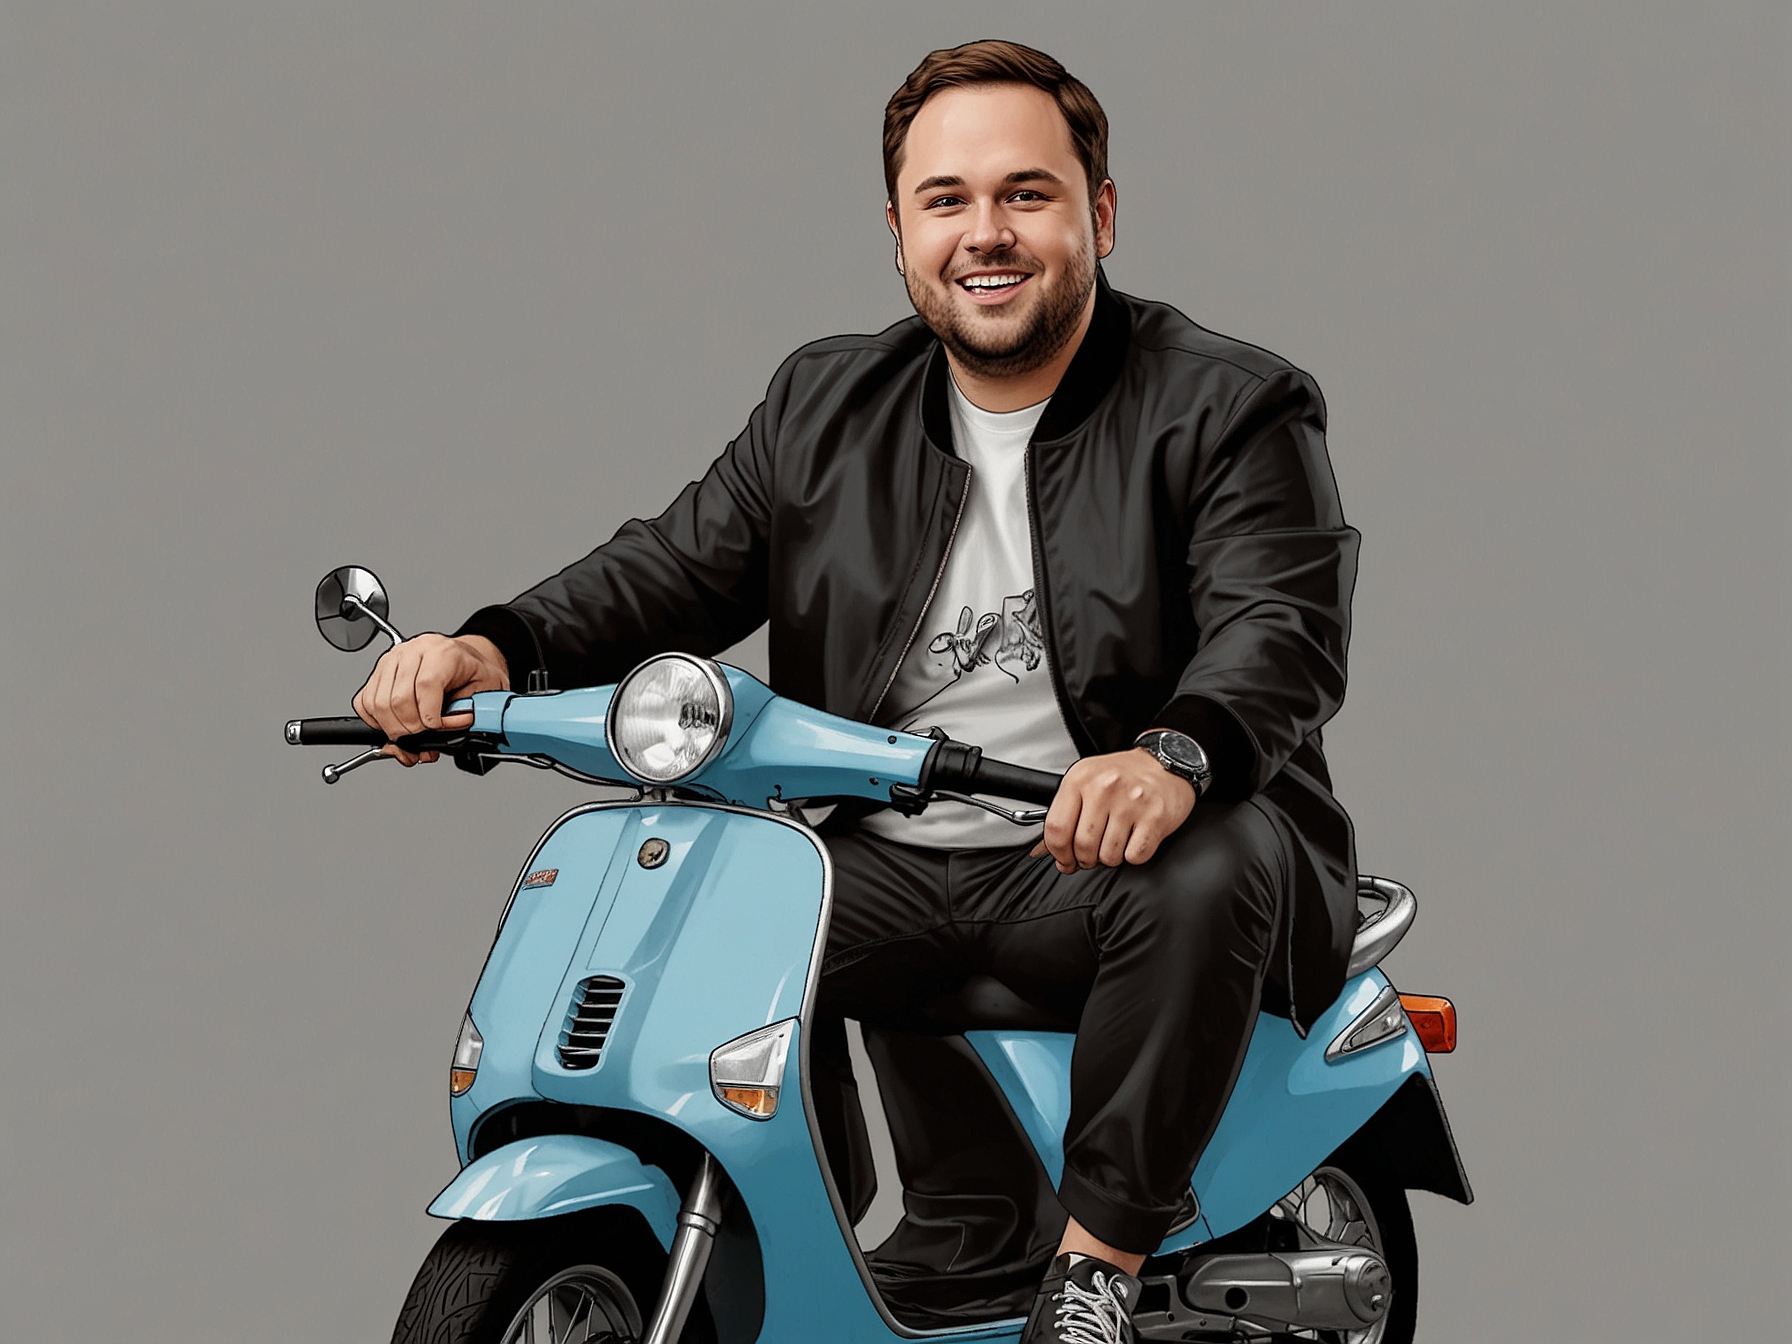 A conceptual illustration showing Scooter Braun as the new CEO of Hybe America, with references to K-pop phenomenon BTS and the entertainment industry's future collaborations.